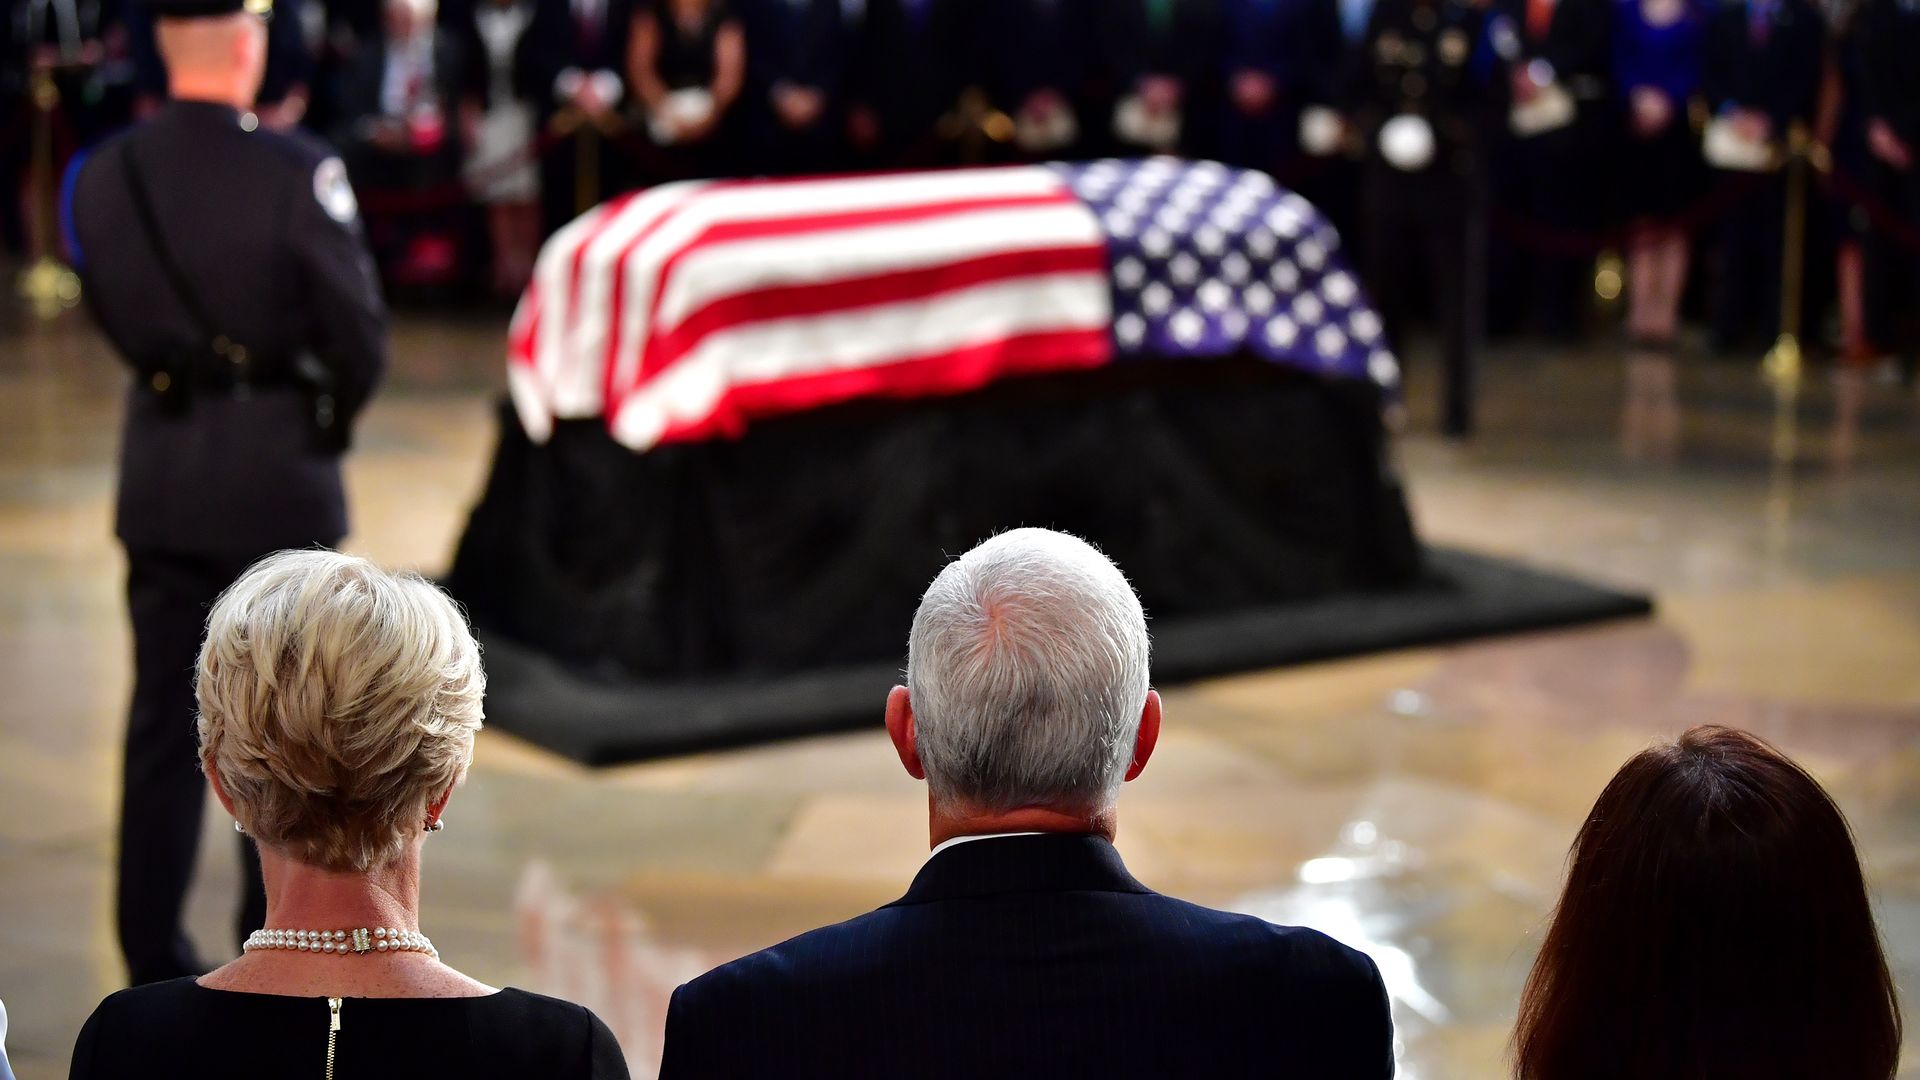 VP Mike Pence and and wife Karen Pence view the casket of former Senator John McCain draped in an American flag in the Capitol Rotunda